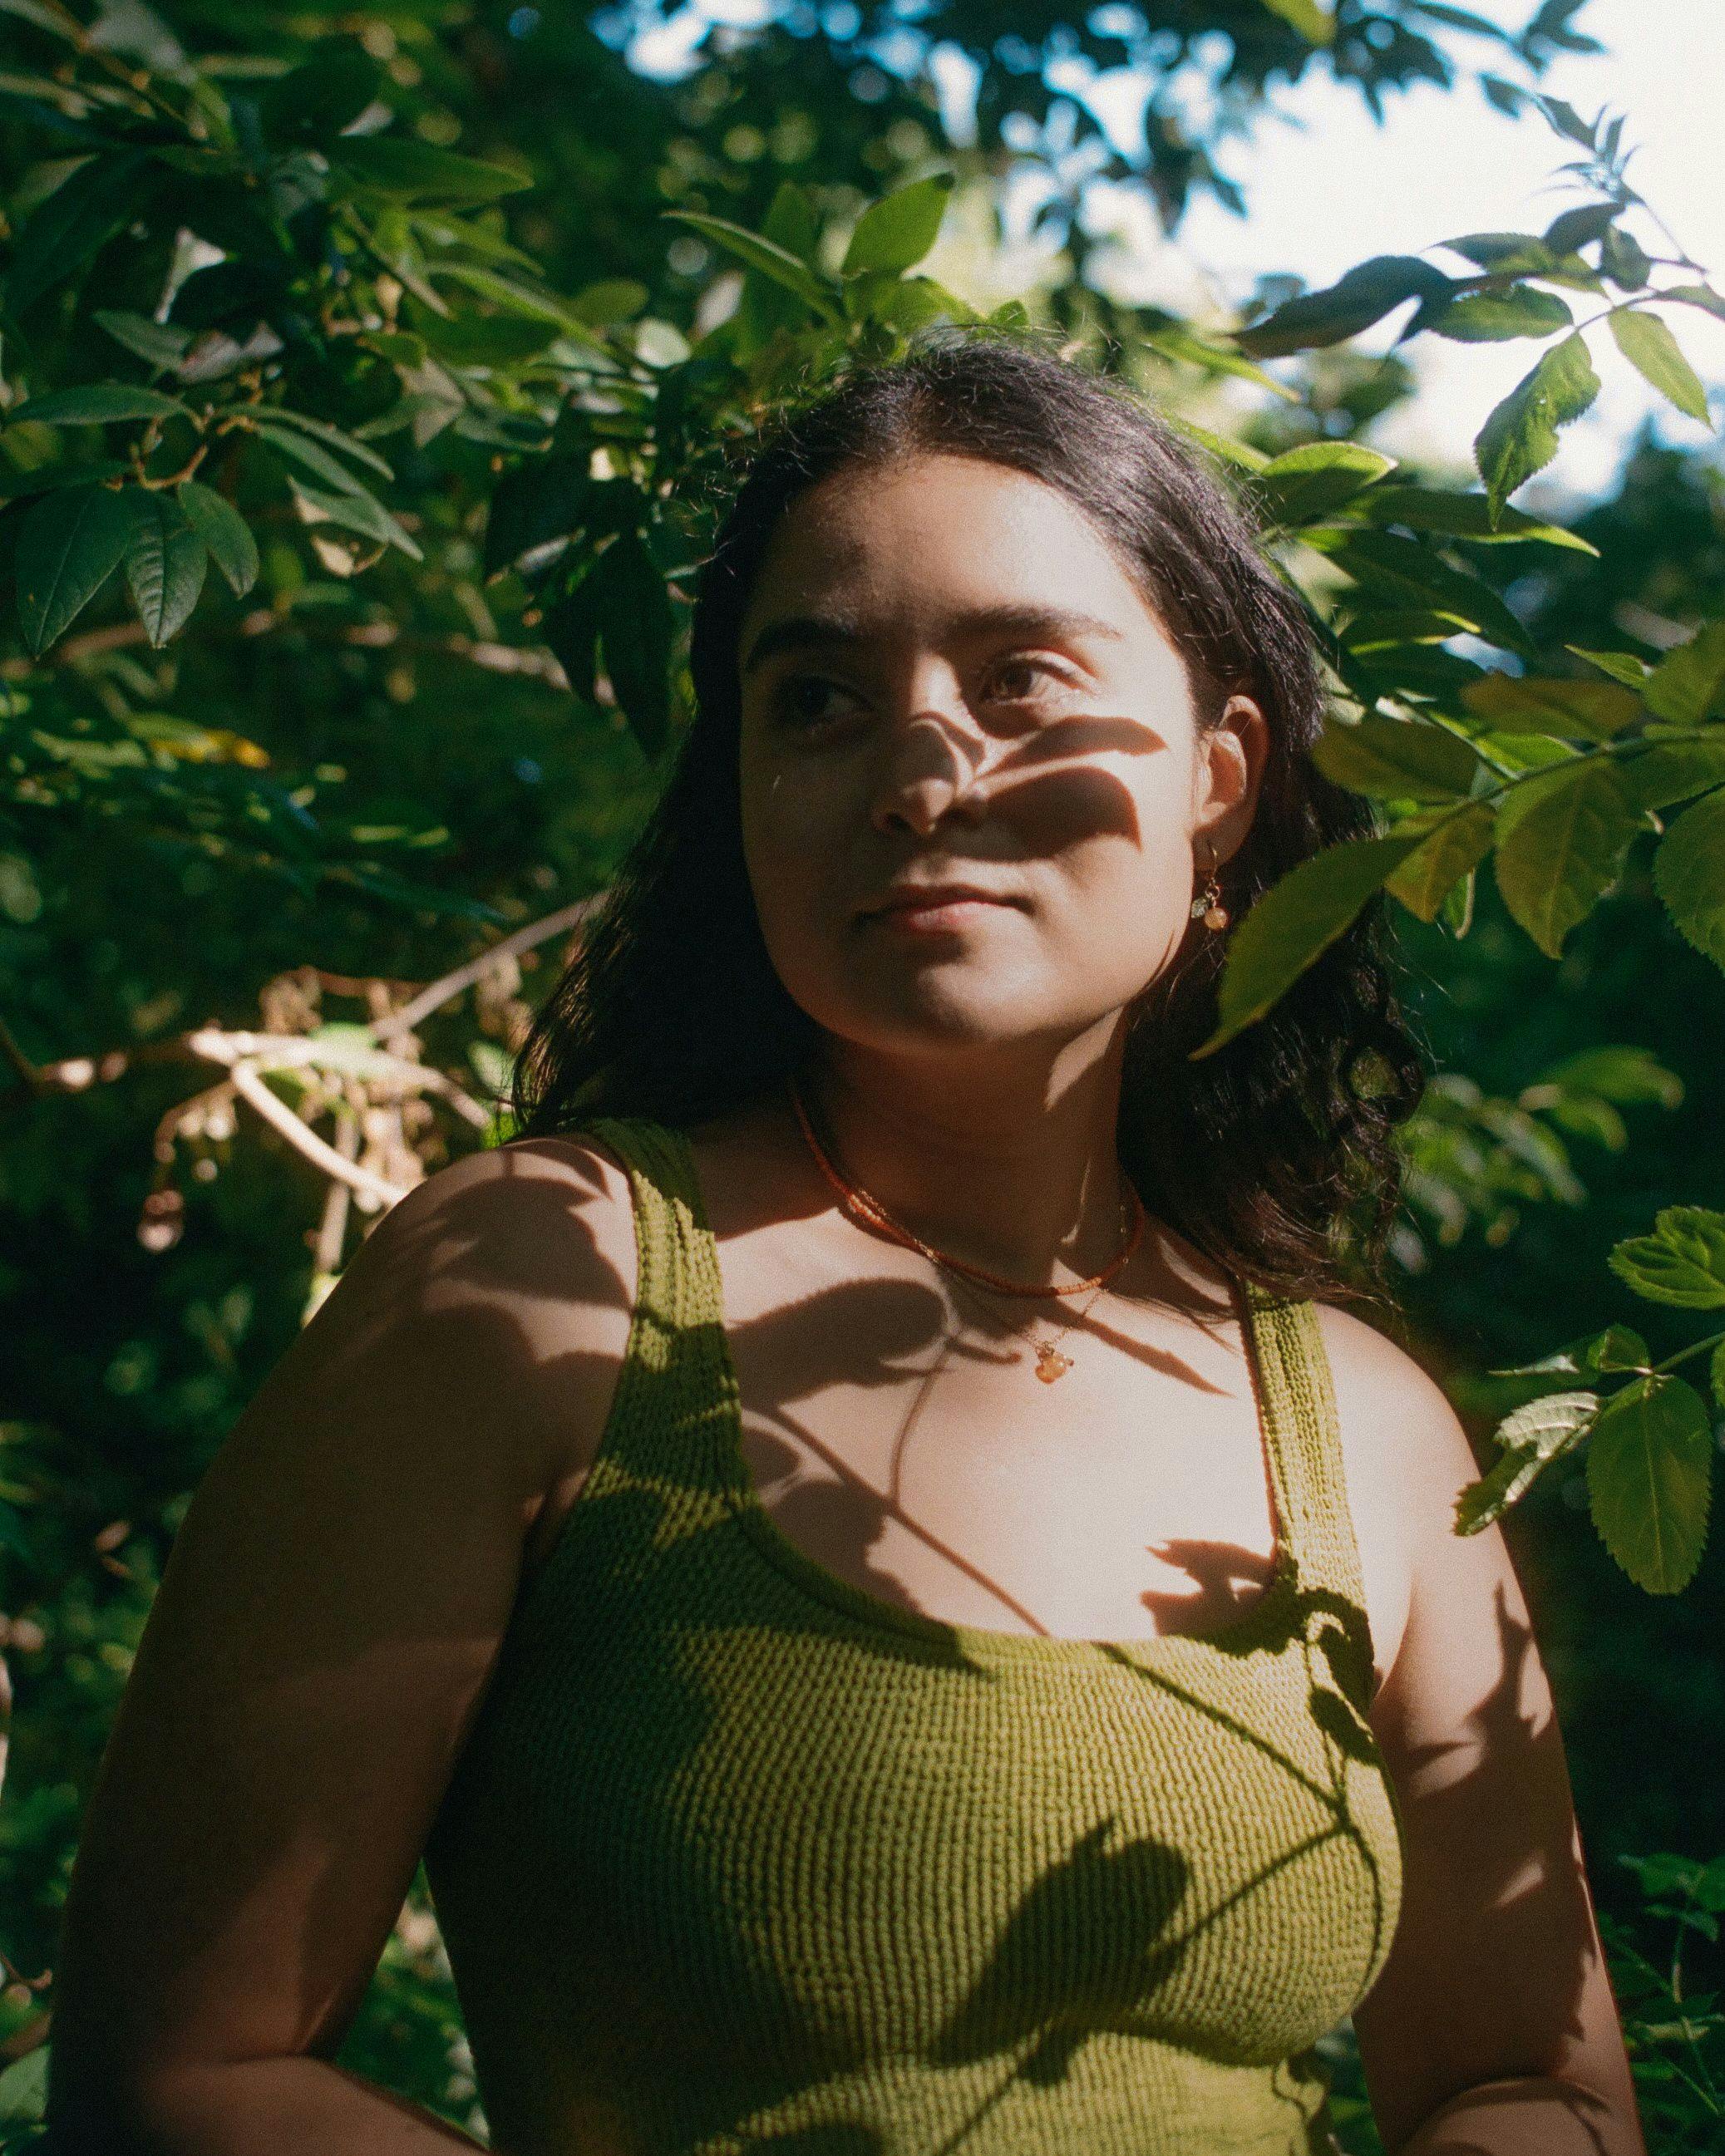 Divya in the shadow of leaves wearing green swimsuit